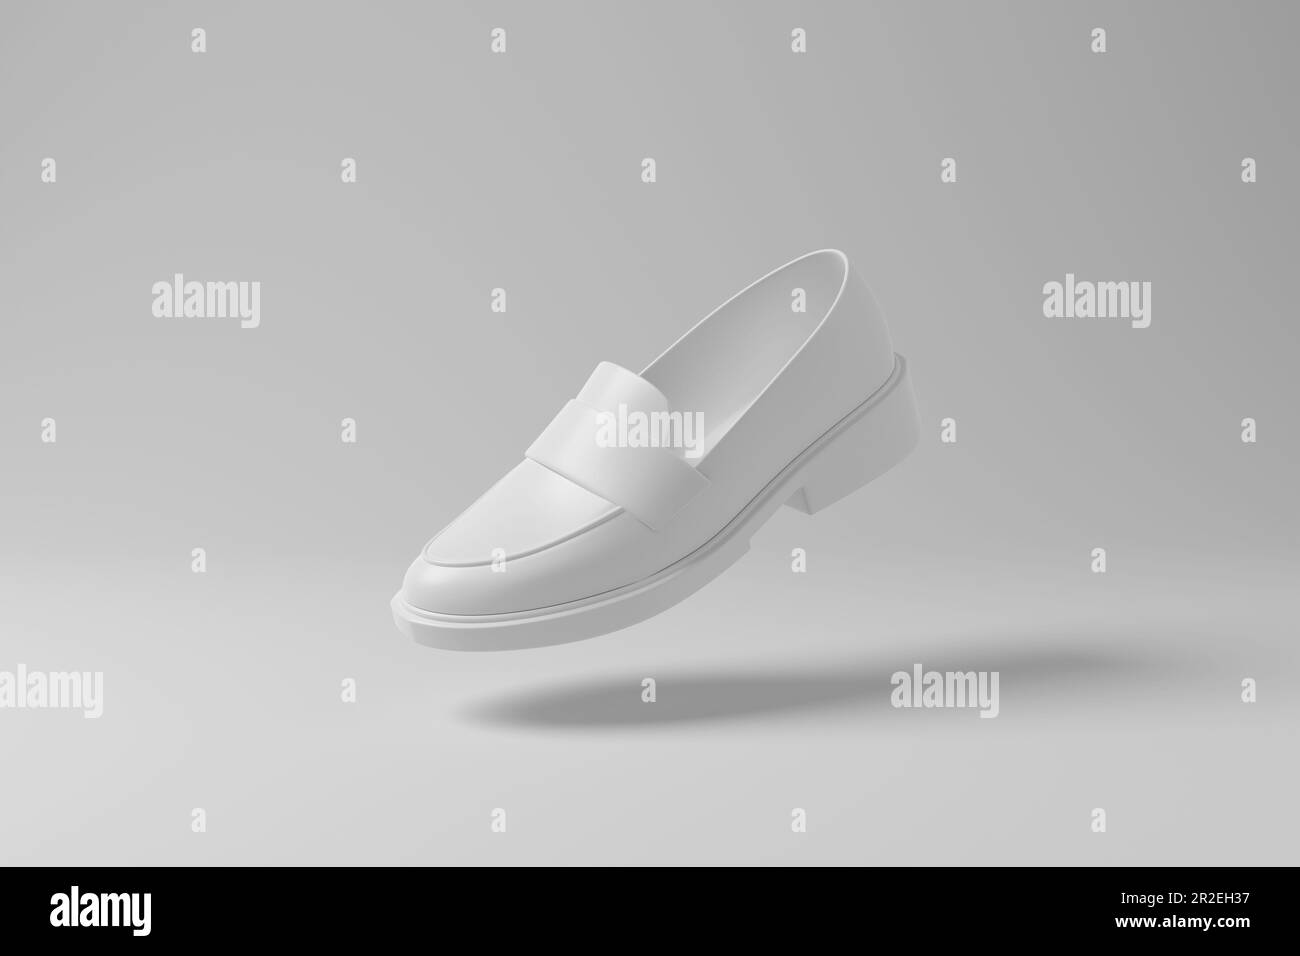 White chunky loafer floating in mid air with shadow on white background in monochrome. Illustration of the concept of footwear, menswear and fashion Stock Photo